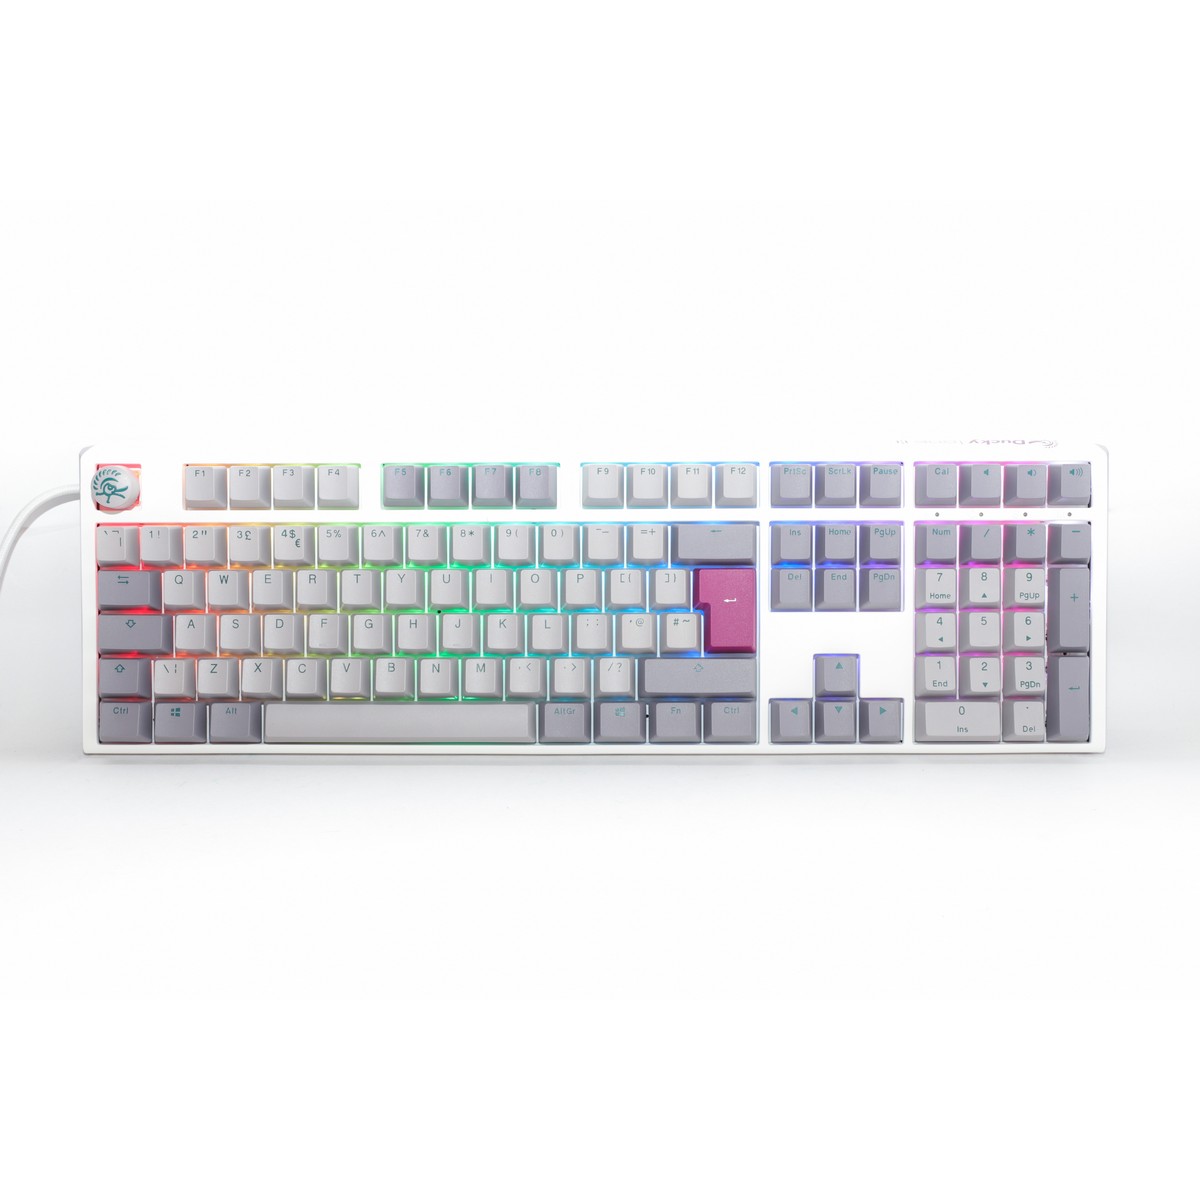 Ducky - Ducky One 3 Mist USB RGB Mechanical Gaming Keyboard Cherry MX Silent Red Switch - UK Layout